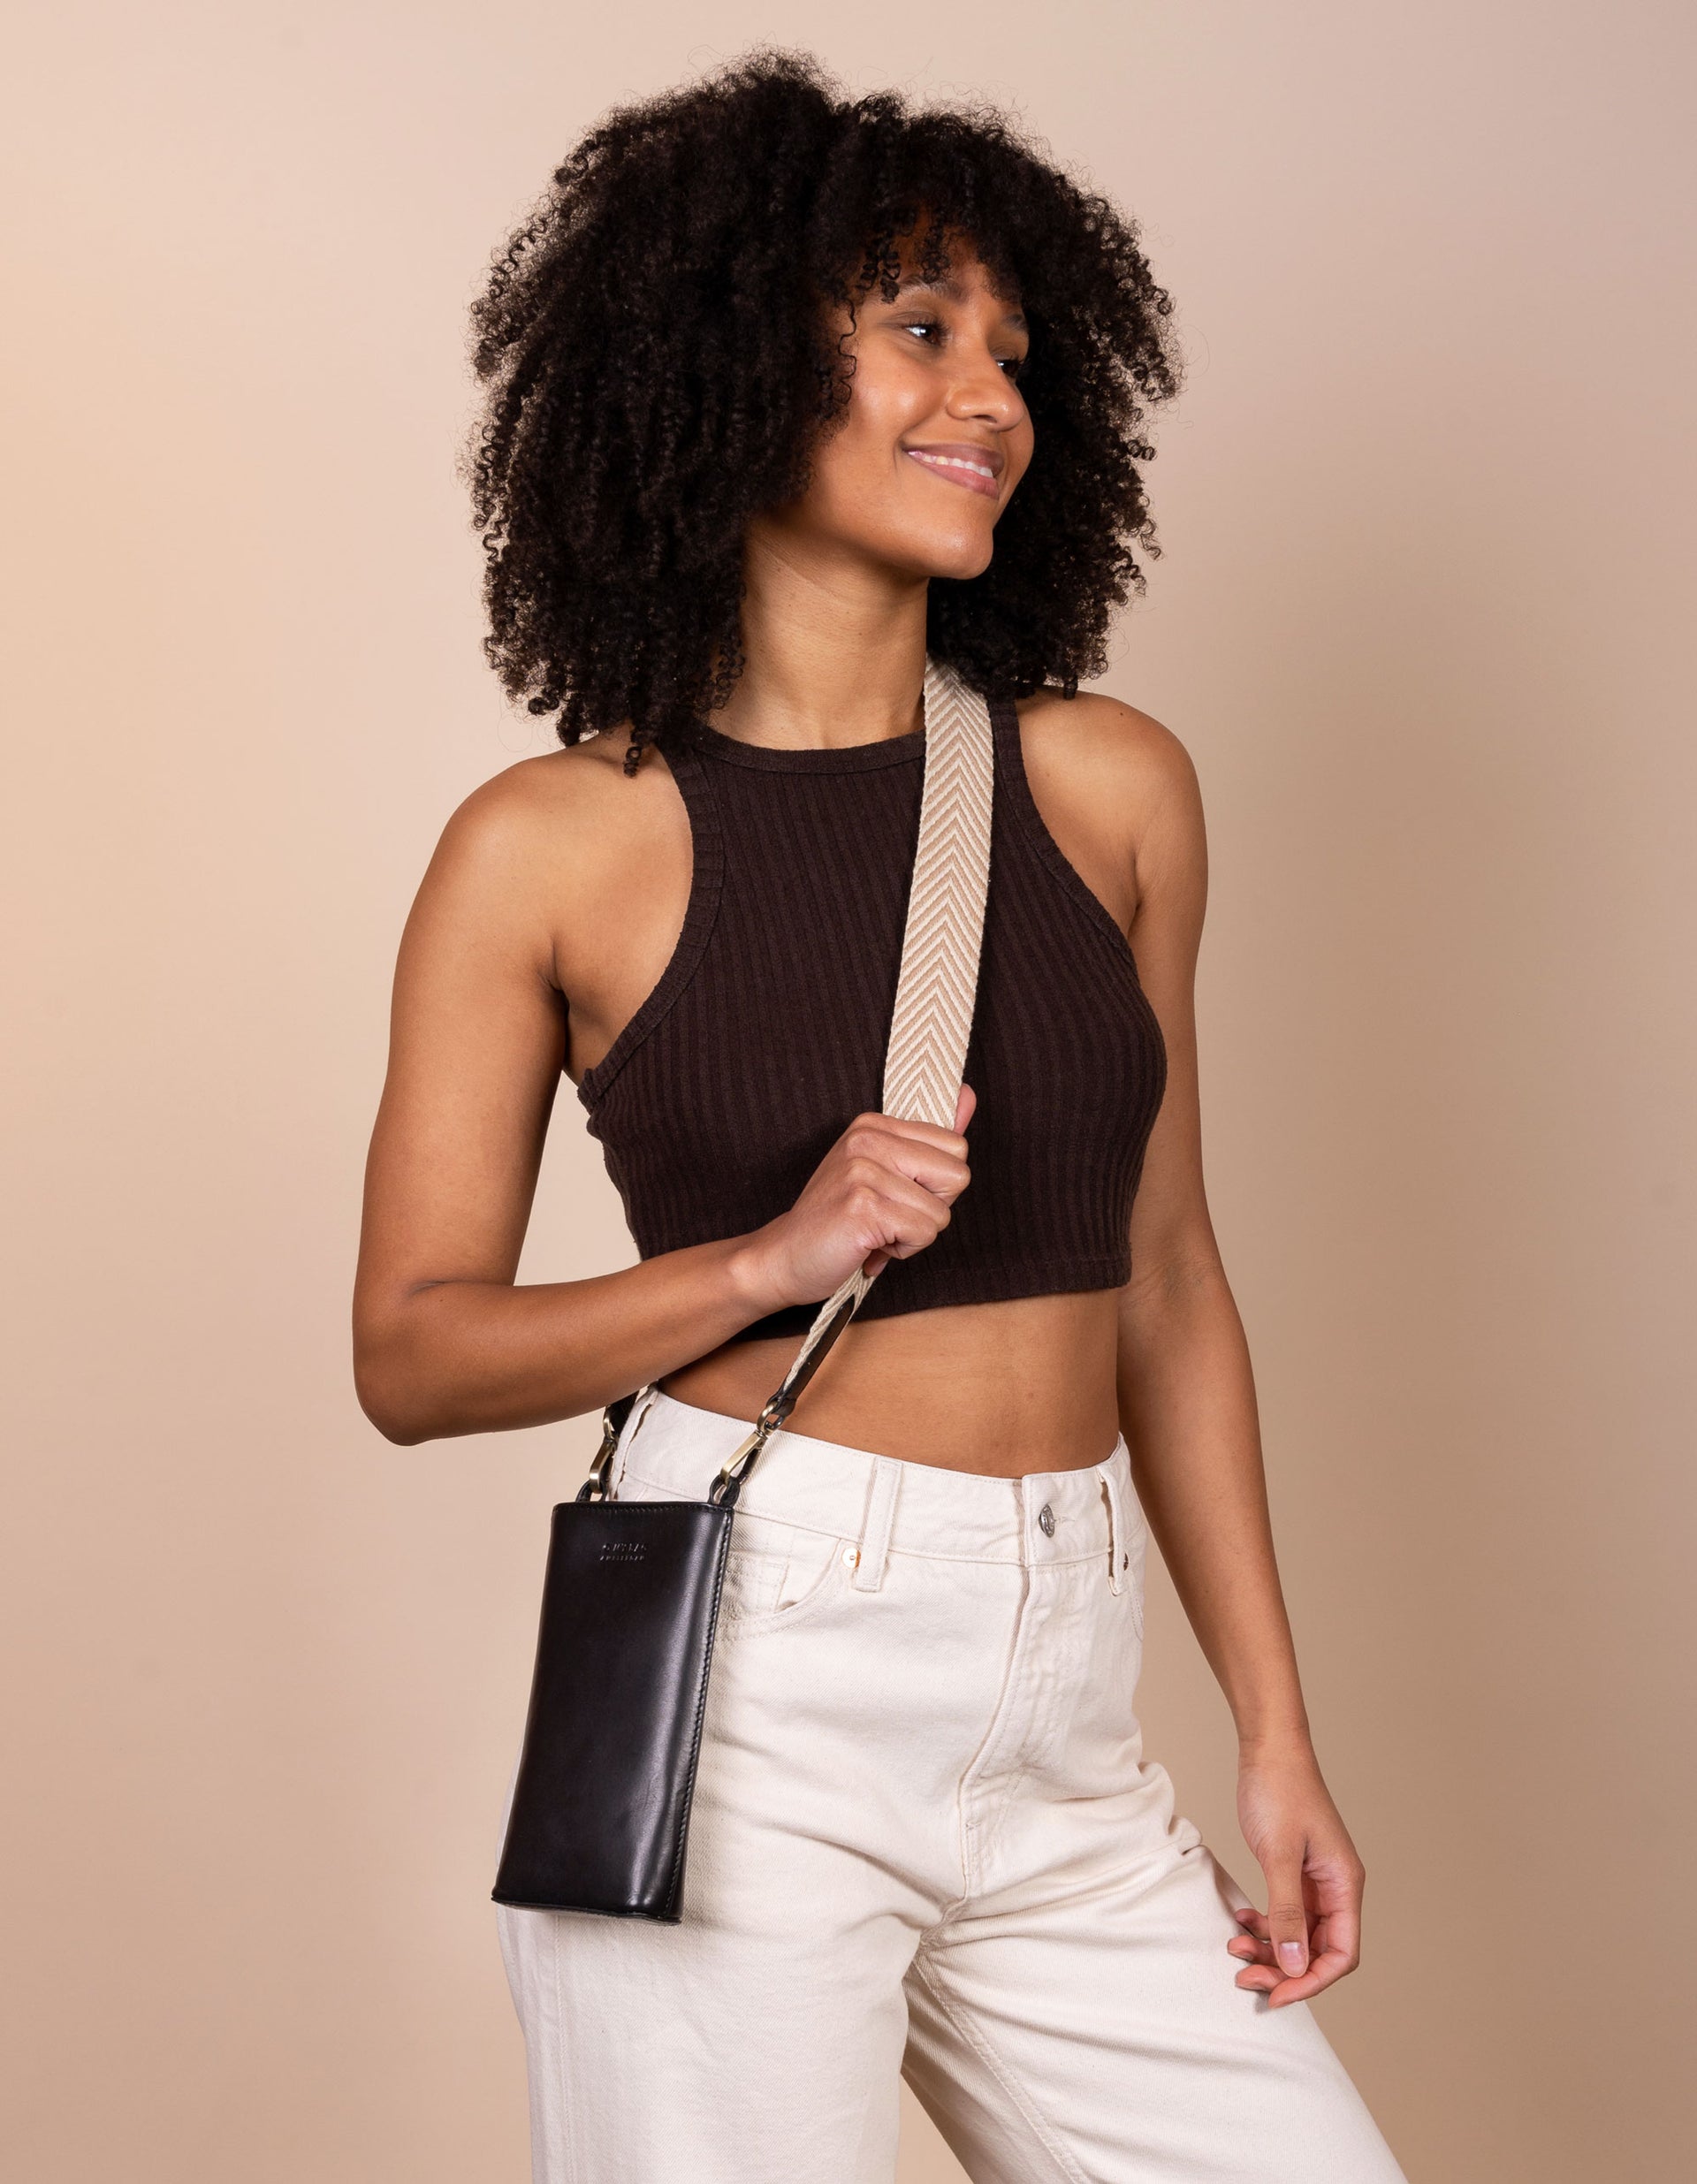 Charlie phone bag - black classic leather - female model product image with the webbing strap